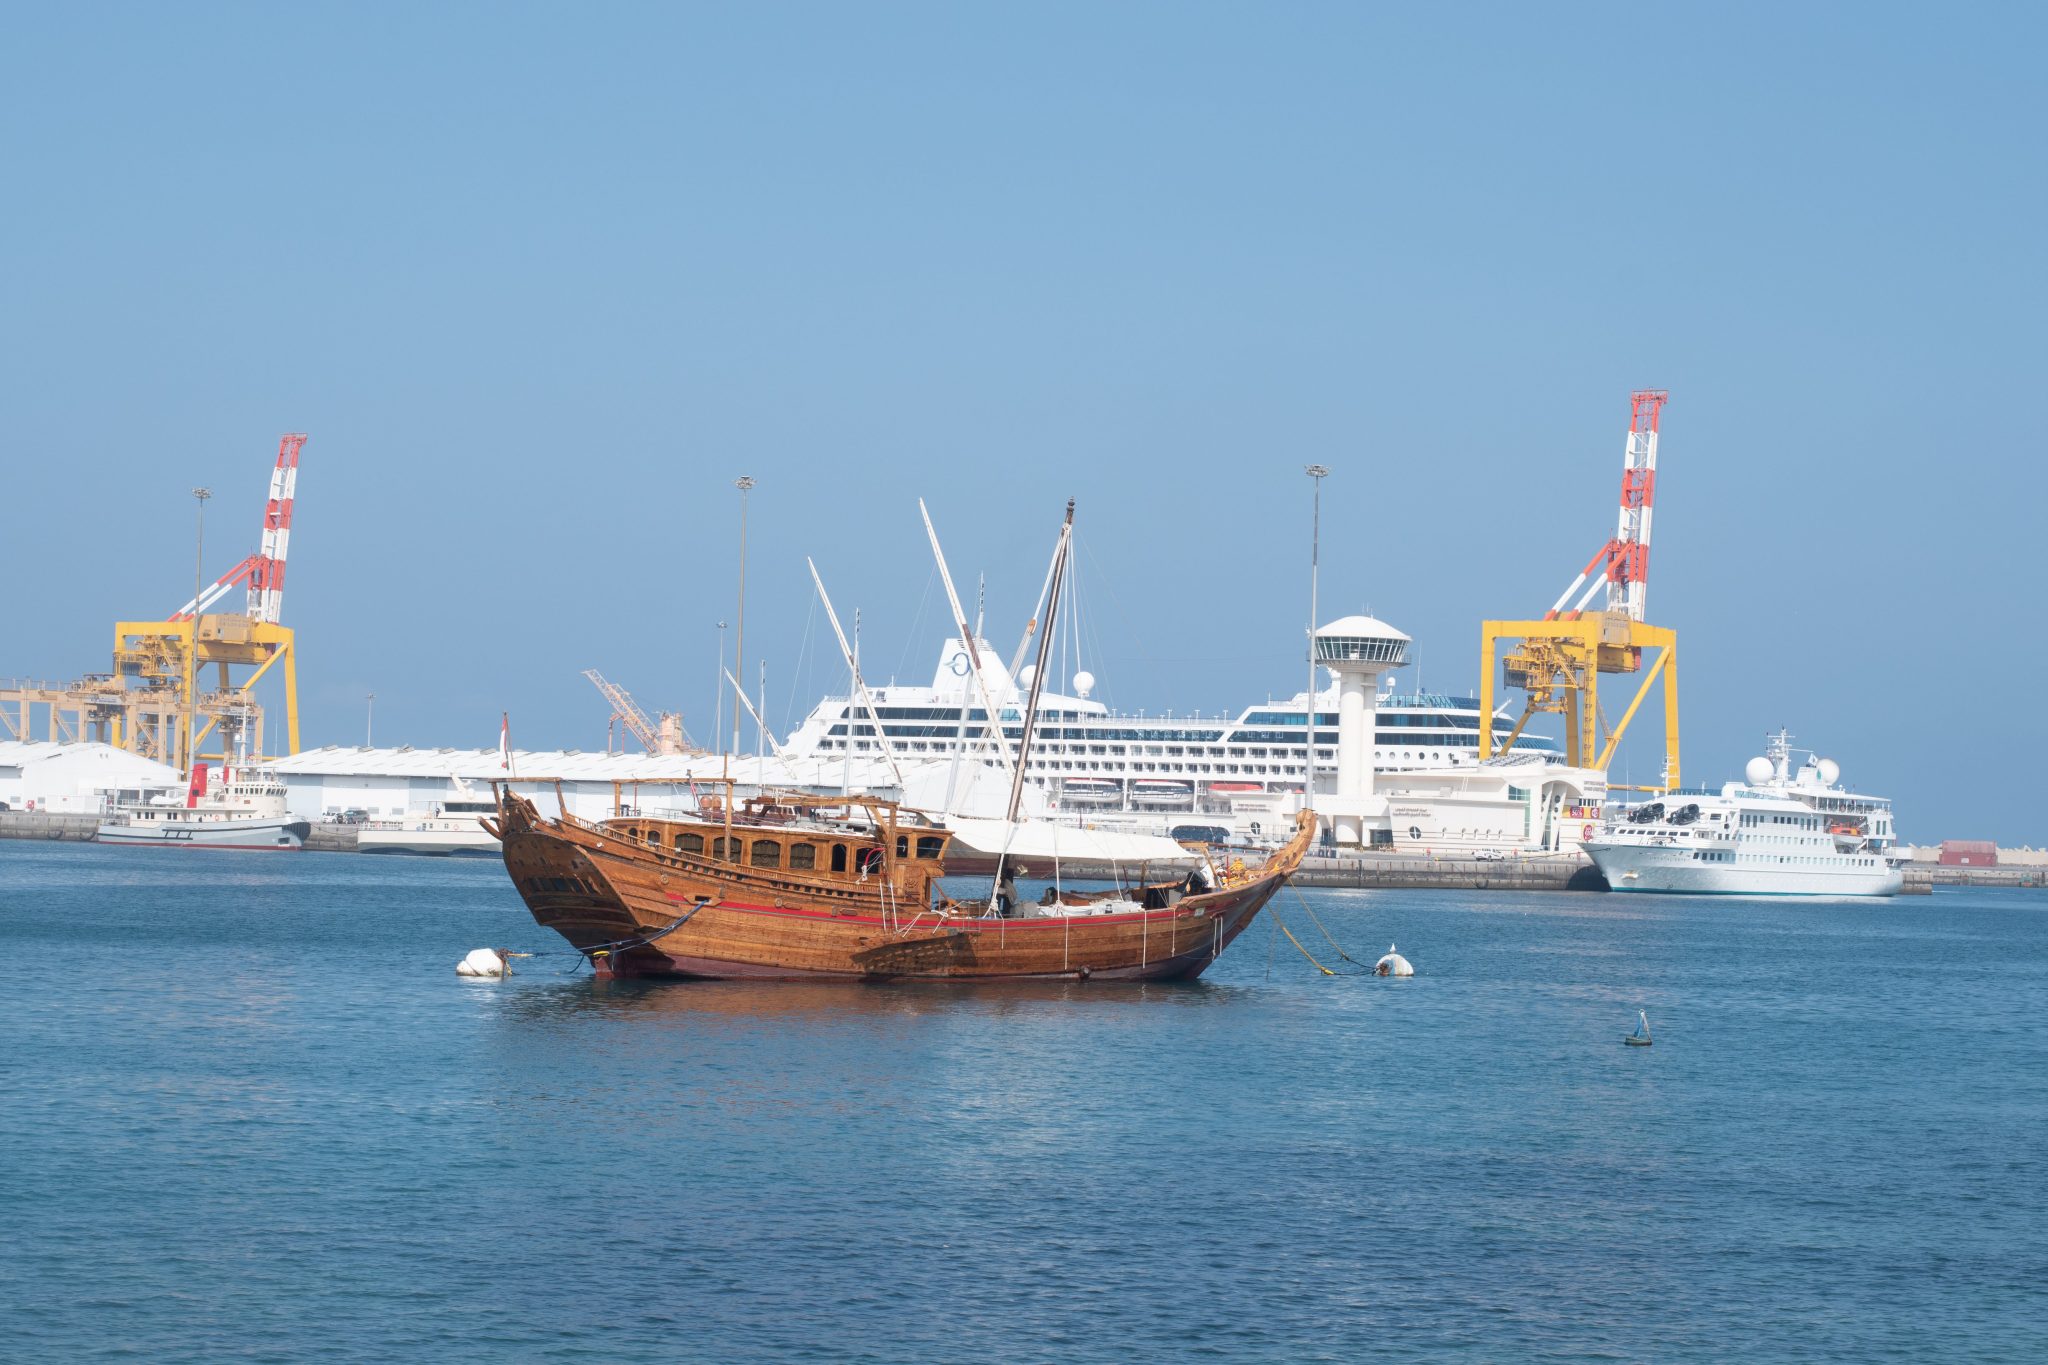 A Vintage Boat at the Matra Souk in Muscat Oman